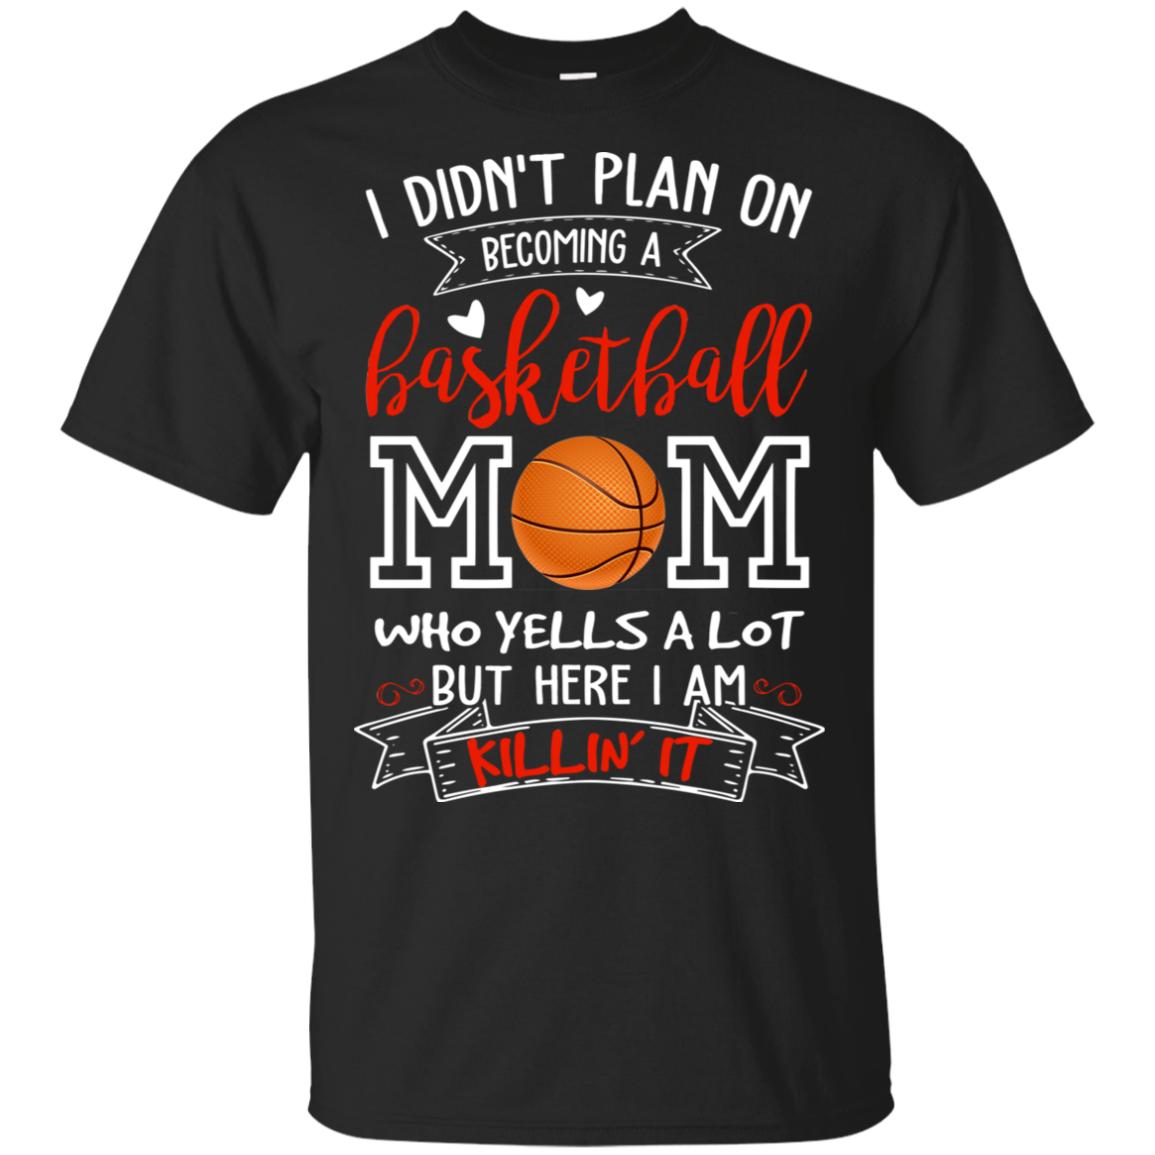 I Didn’t plan on Becoming a Basketball Mom Funny Shirt For Basketball Lover TT03